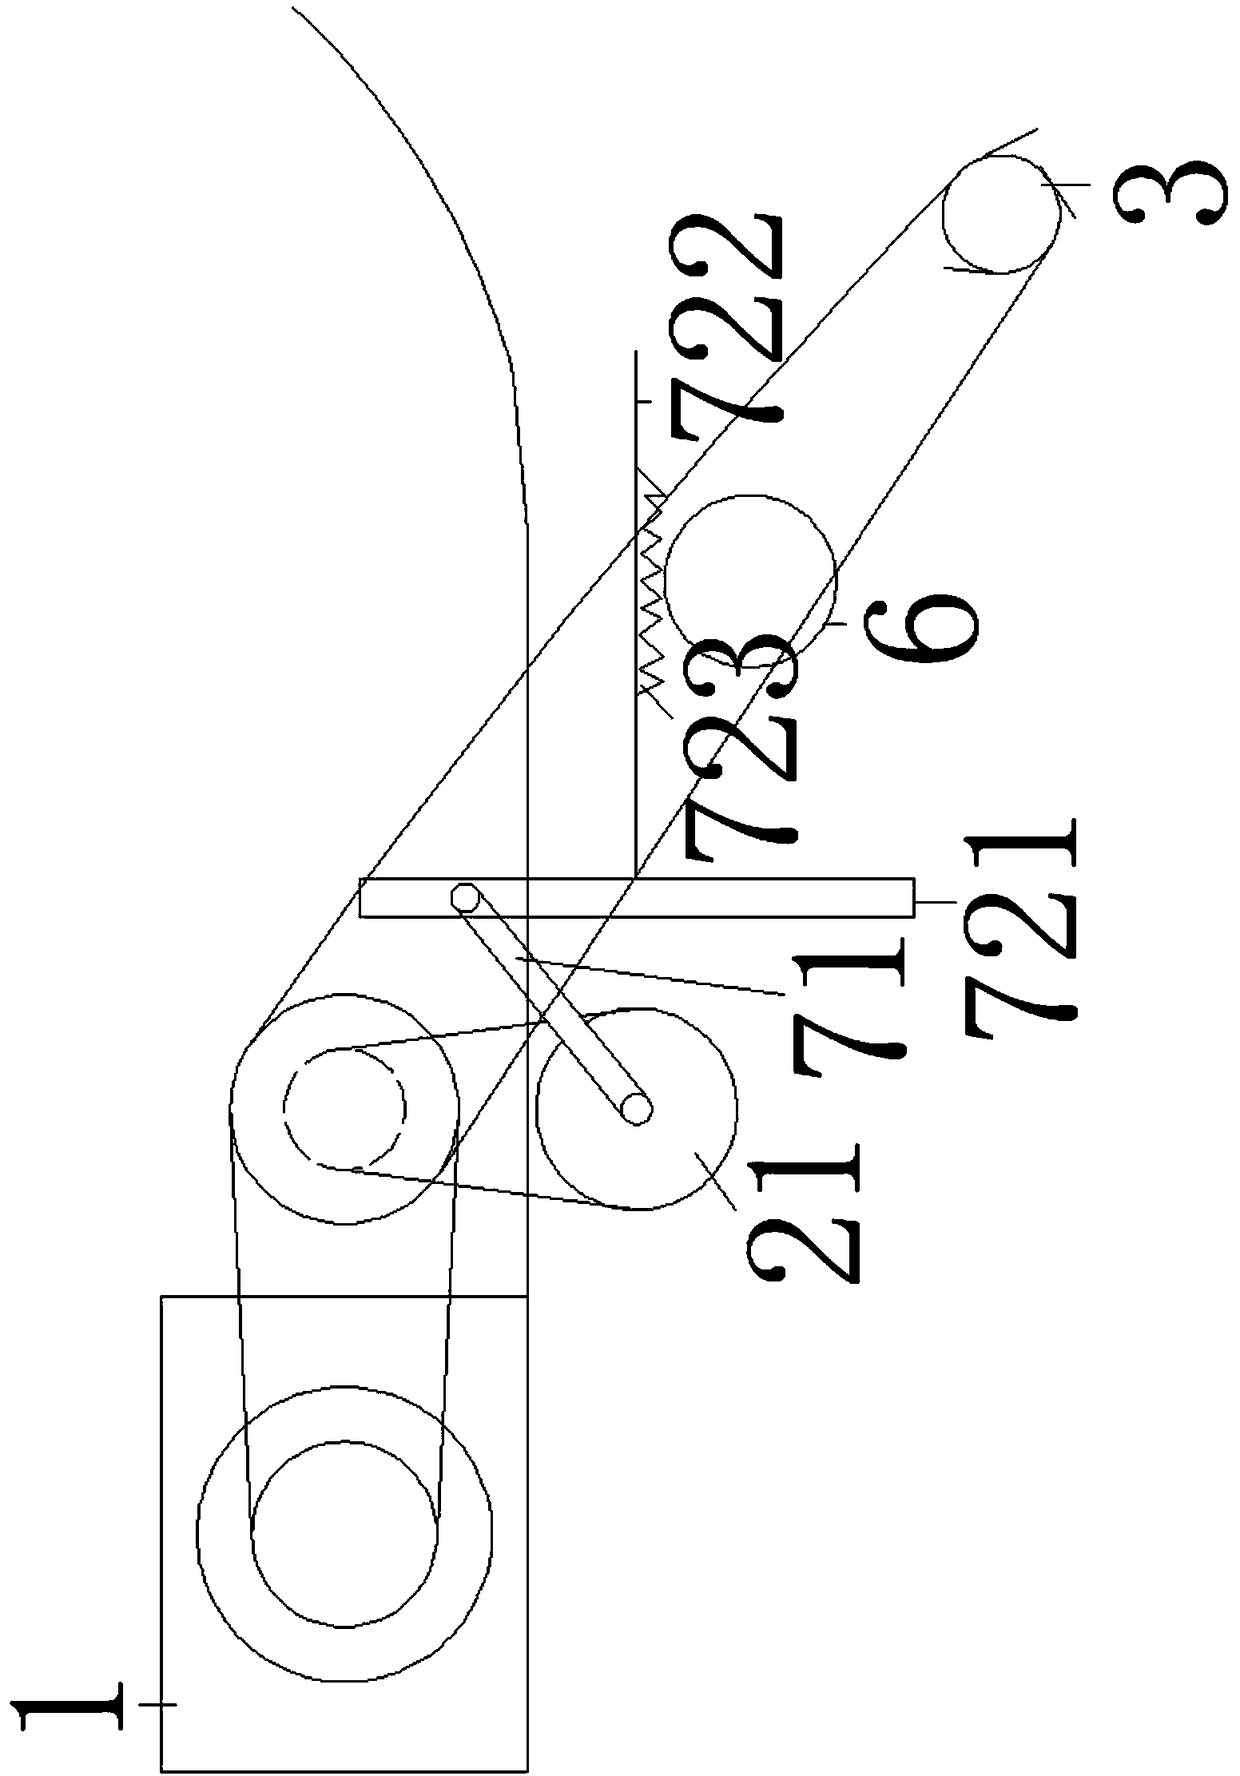 Single-wheel driving vehicle and pit digging mechanism